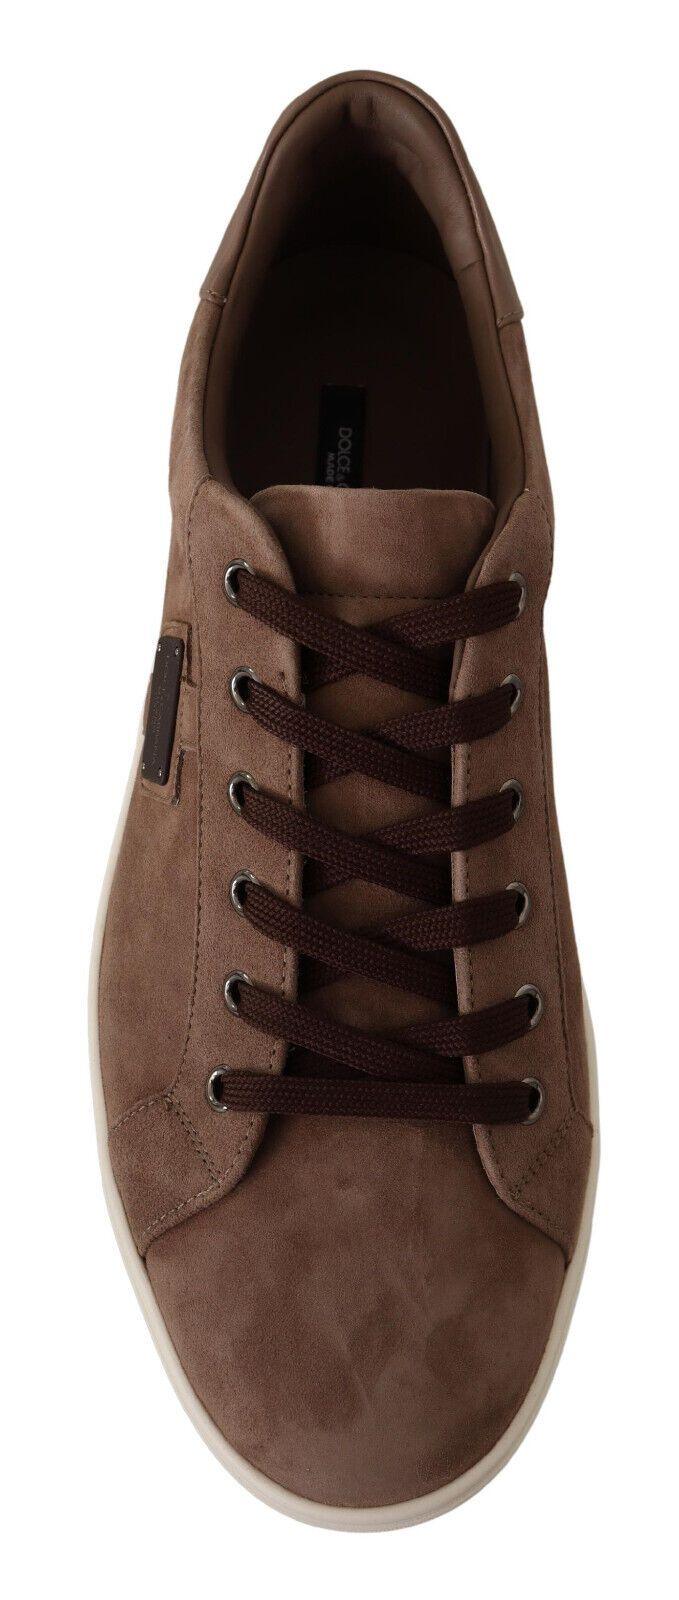 Brown Suede Leather Sneakers Shoes - Designed by Dolce & Gabbana Available to Buy at a Discounted Price on Moon Behind The Hill Online Designer Discount Store